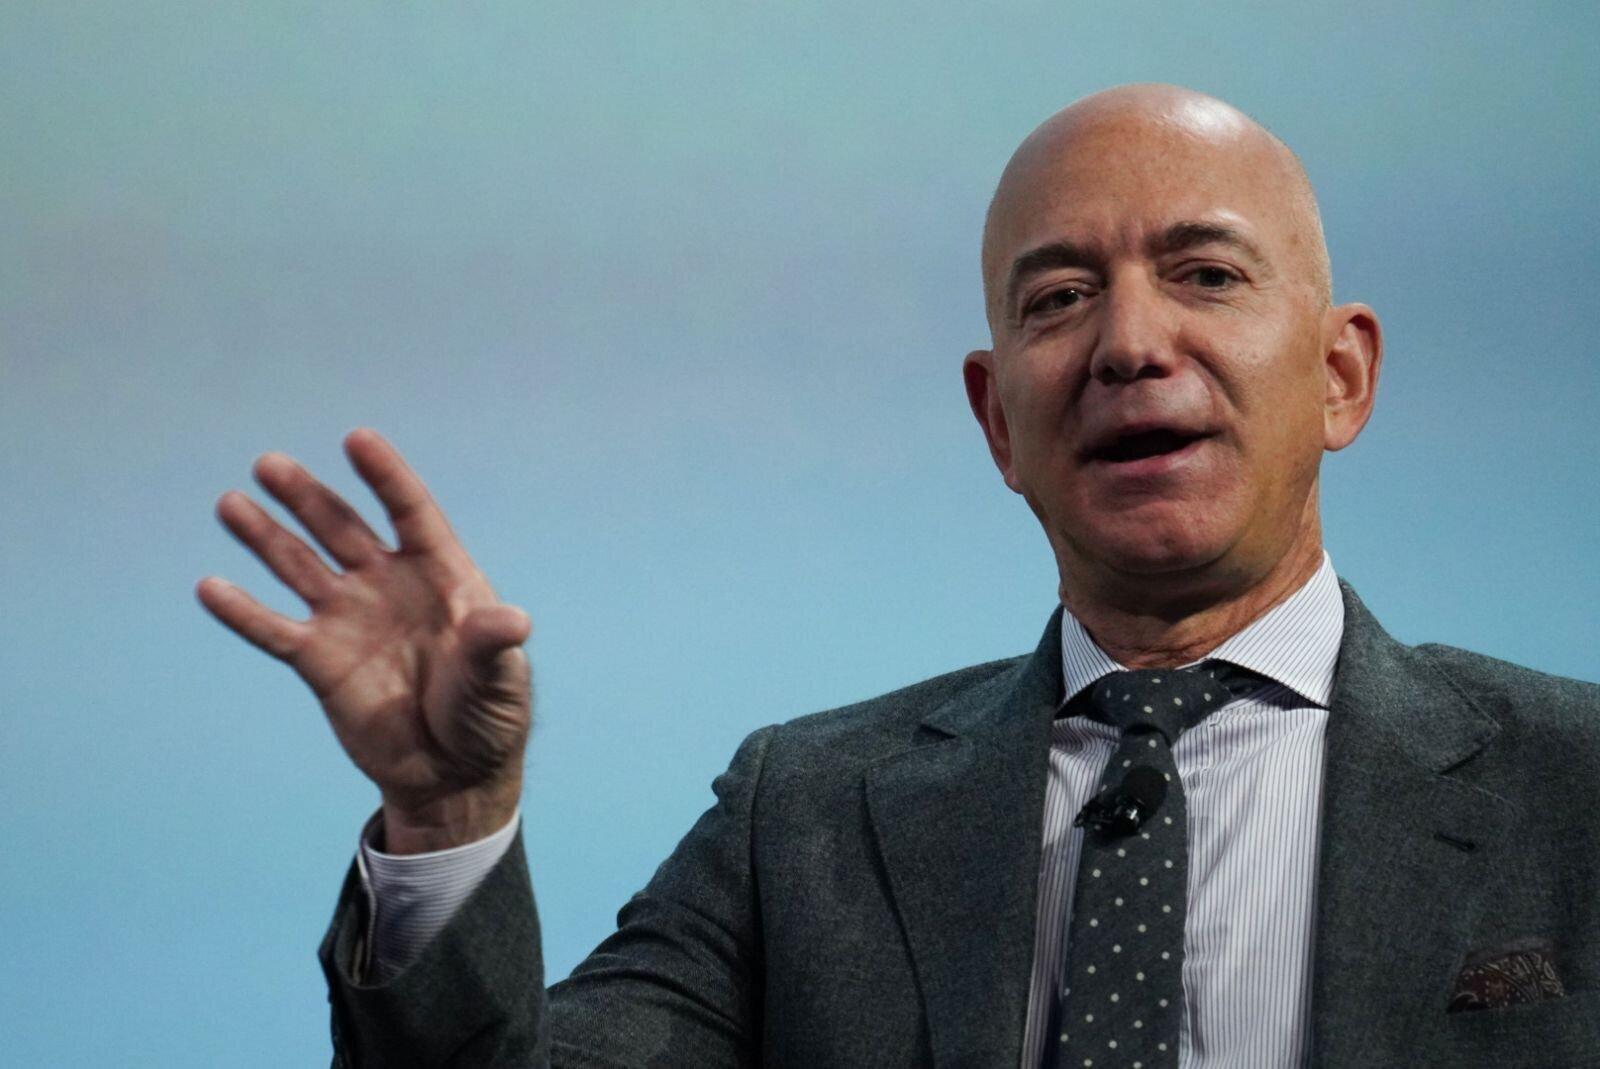 Wall Street Jumps for Second Day; Amazon Says Bezos to Step Down From CEO Role